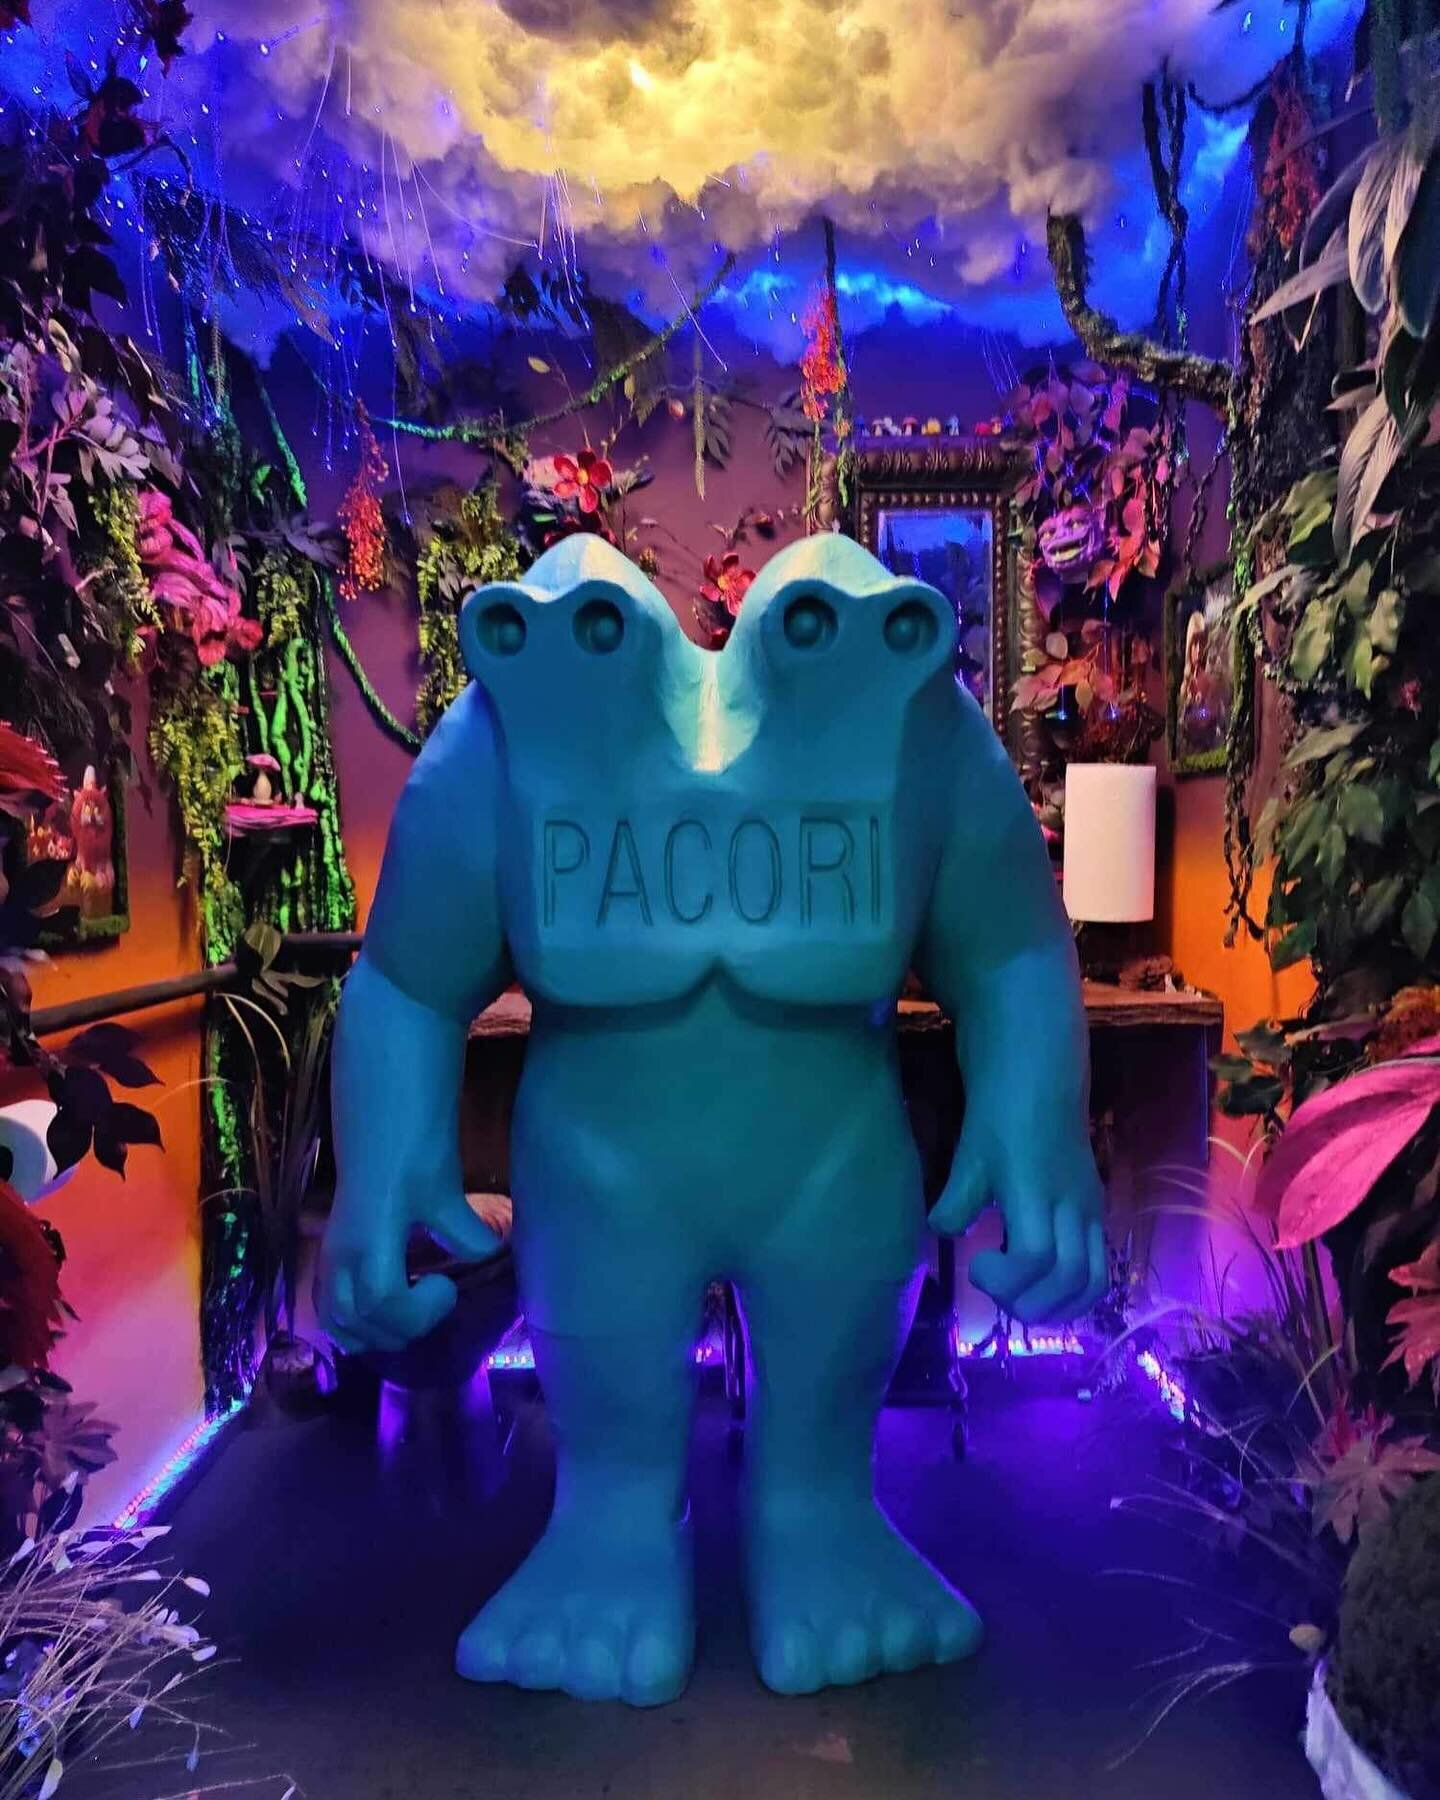 I don&rsquo;t even know where to begin with this giant Pacori Folks pi&ntilde;ata we commissioned from @kc_macnamara and @baba_droc and LazerHawk 500. Surreal. Wonderful. Magic. We are all so in love with our new friend. Thank you so much &hearts;️

